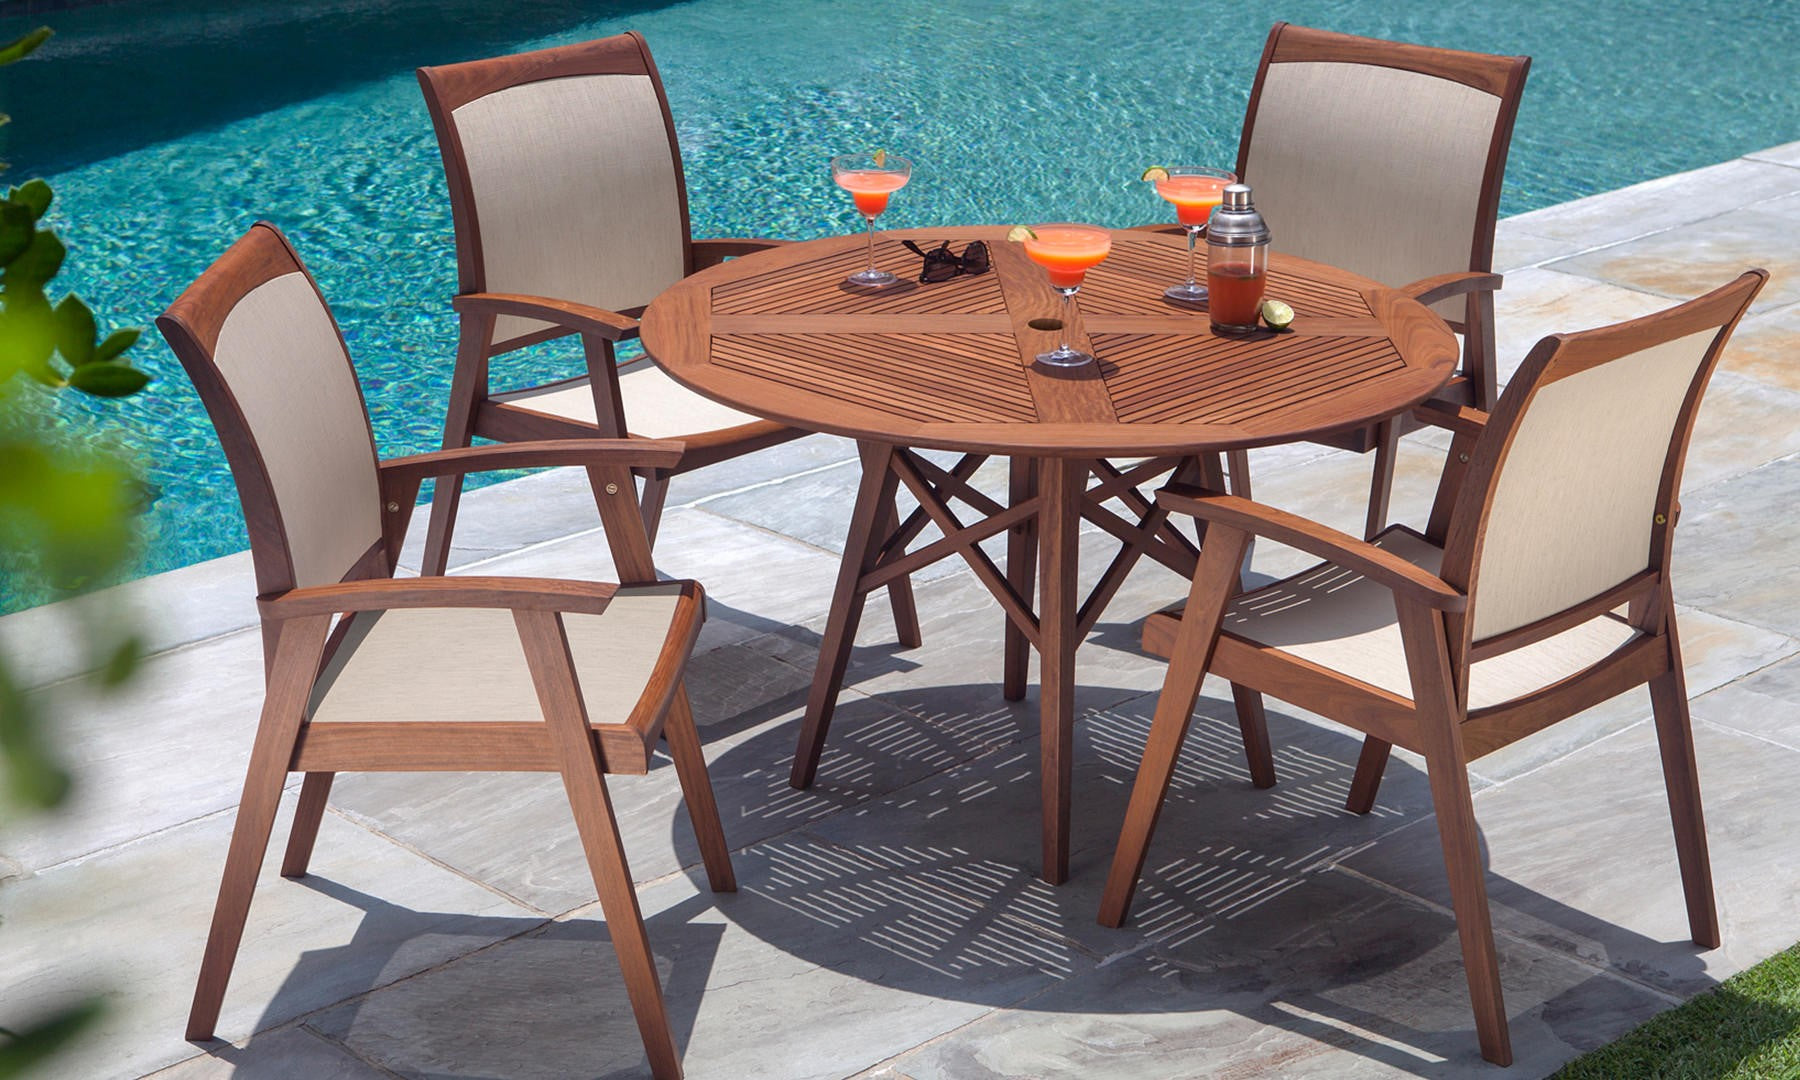 A Jensen Leisure Opal Round Table with Topaz Chairs near a pool.